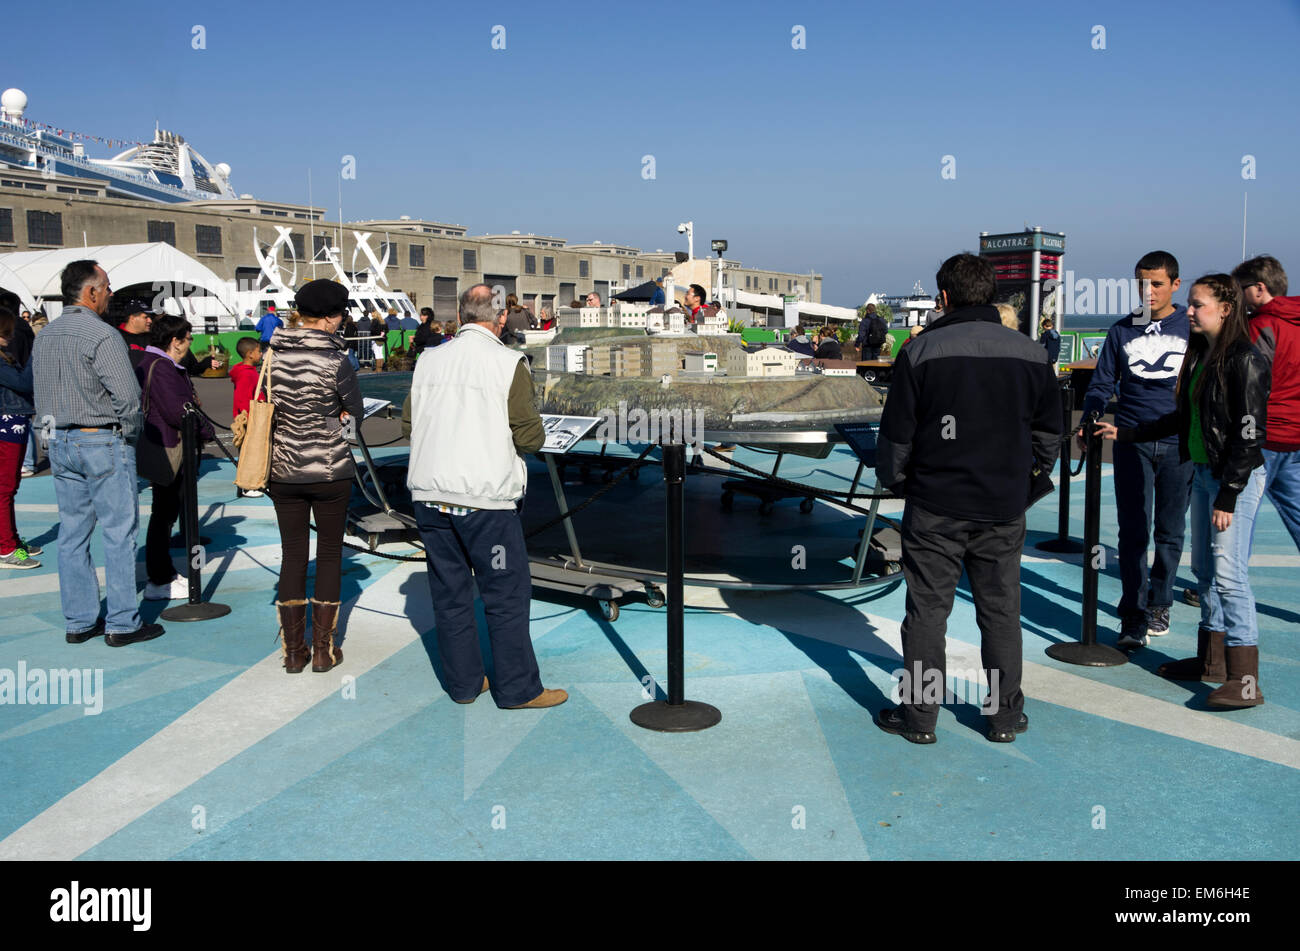 Alcatraz plaza, visitors look at model of the island prison while waiting for the boat. San Francisco Stock Photo